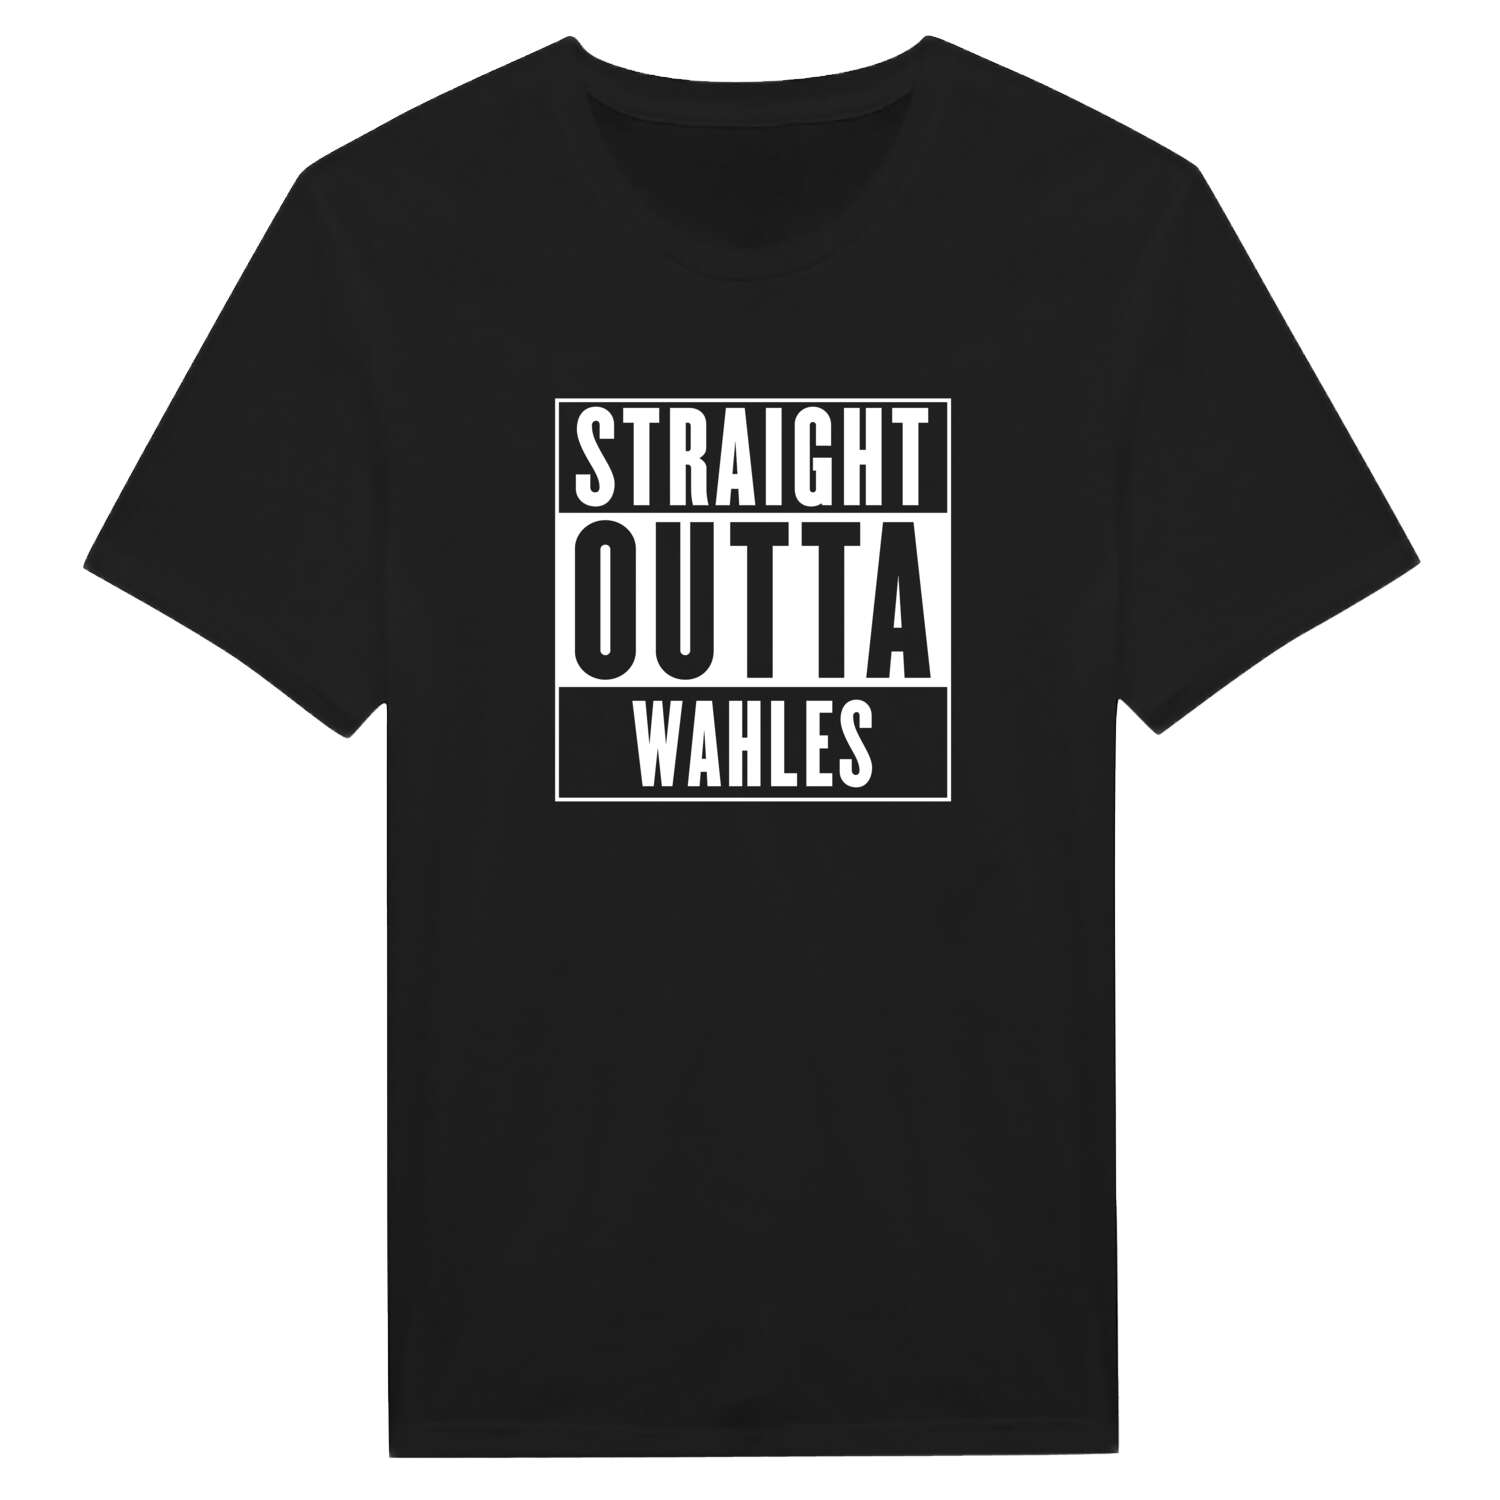 Wahles T-Shirt »Straight Outta«